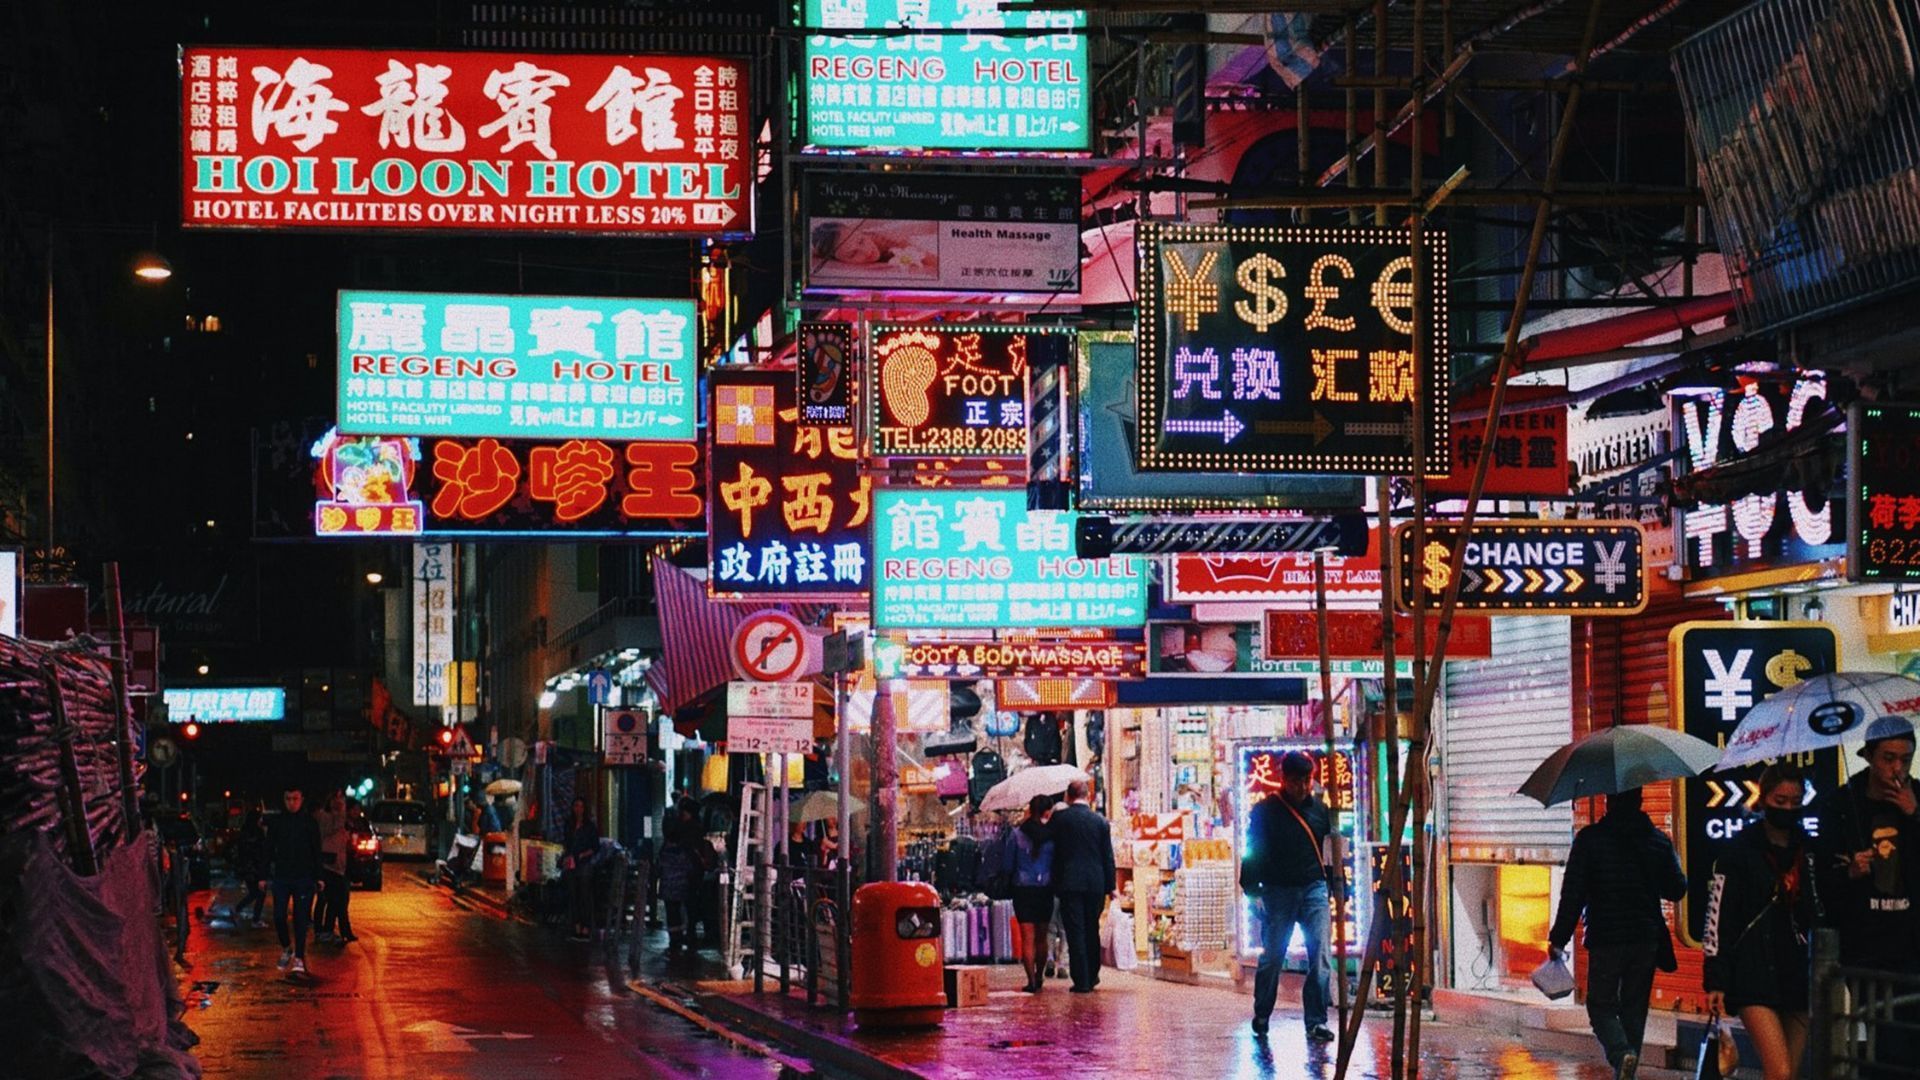 20 Best Things to Do in Hong Kong - What is Hong Kong Most Famous